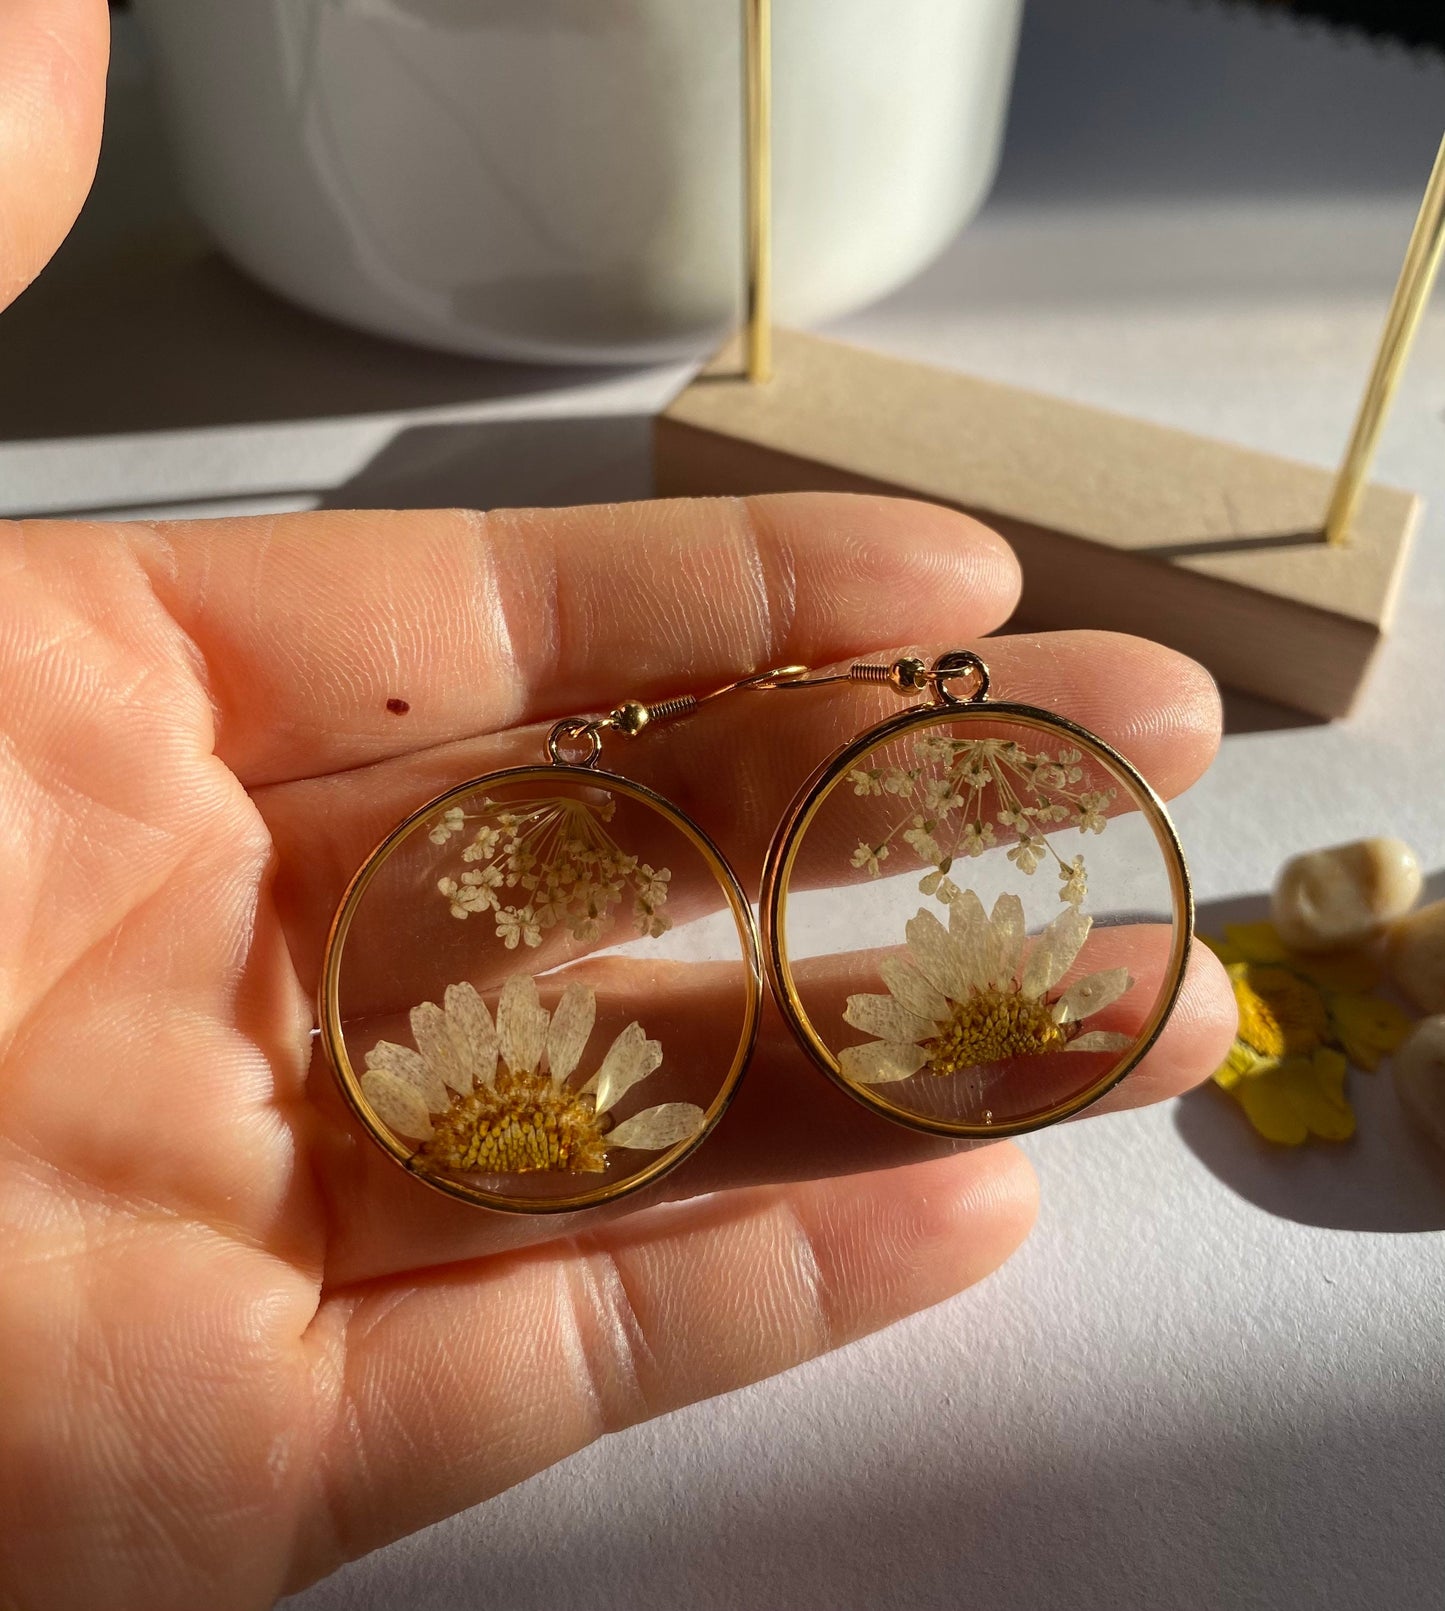 Chrysanthemum Pressed Dried Real Flower Earring | Handmade Resin Jewelry | Real Daisy Qurky April Birth Flower Earring Gift for Her | Woman